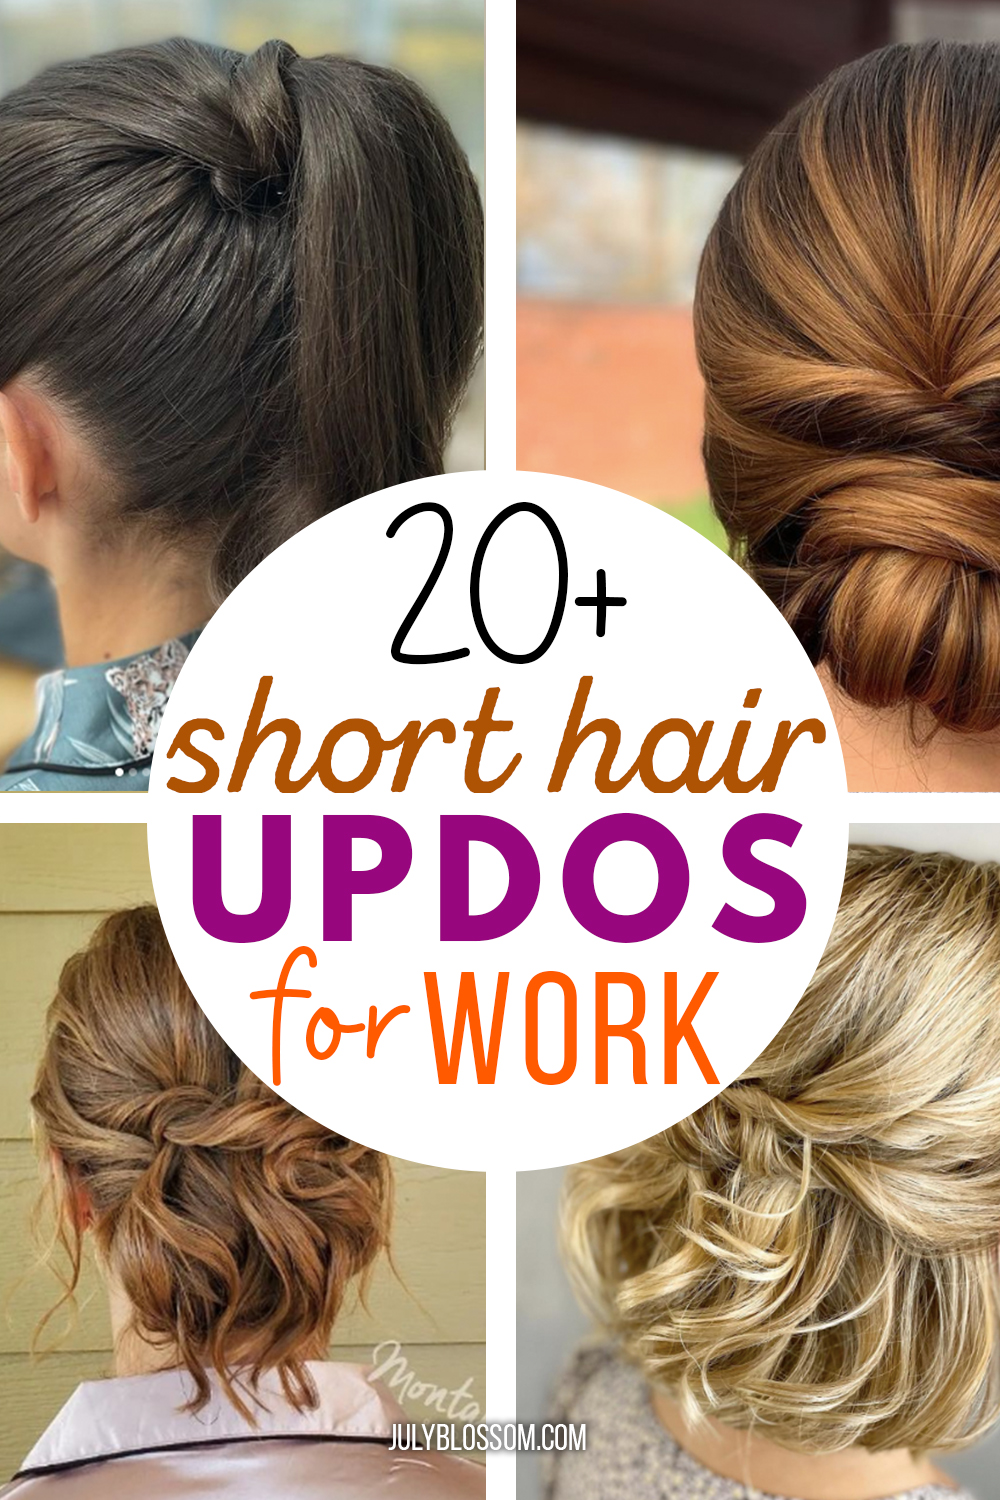 20+ Chic & Easy Short Hair Updos for Work - ♡ July Blossom ♡